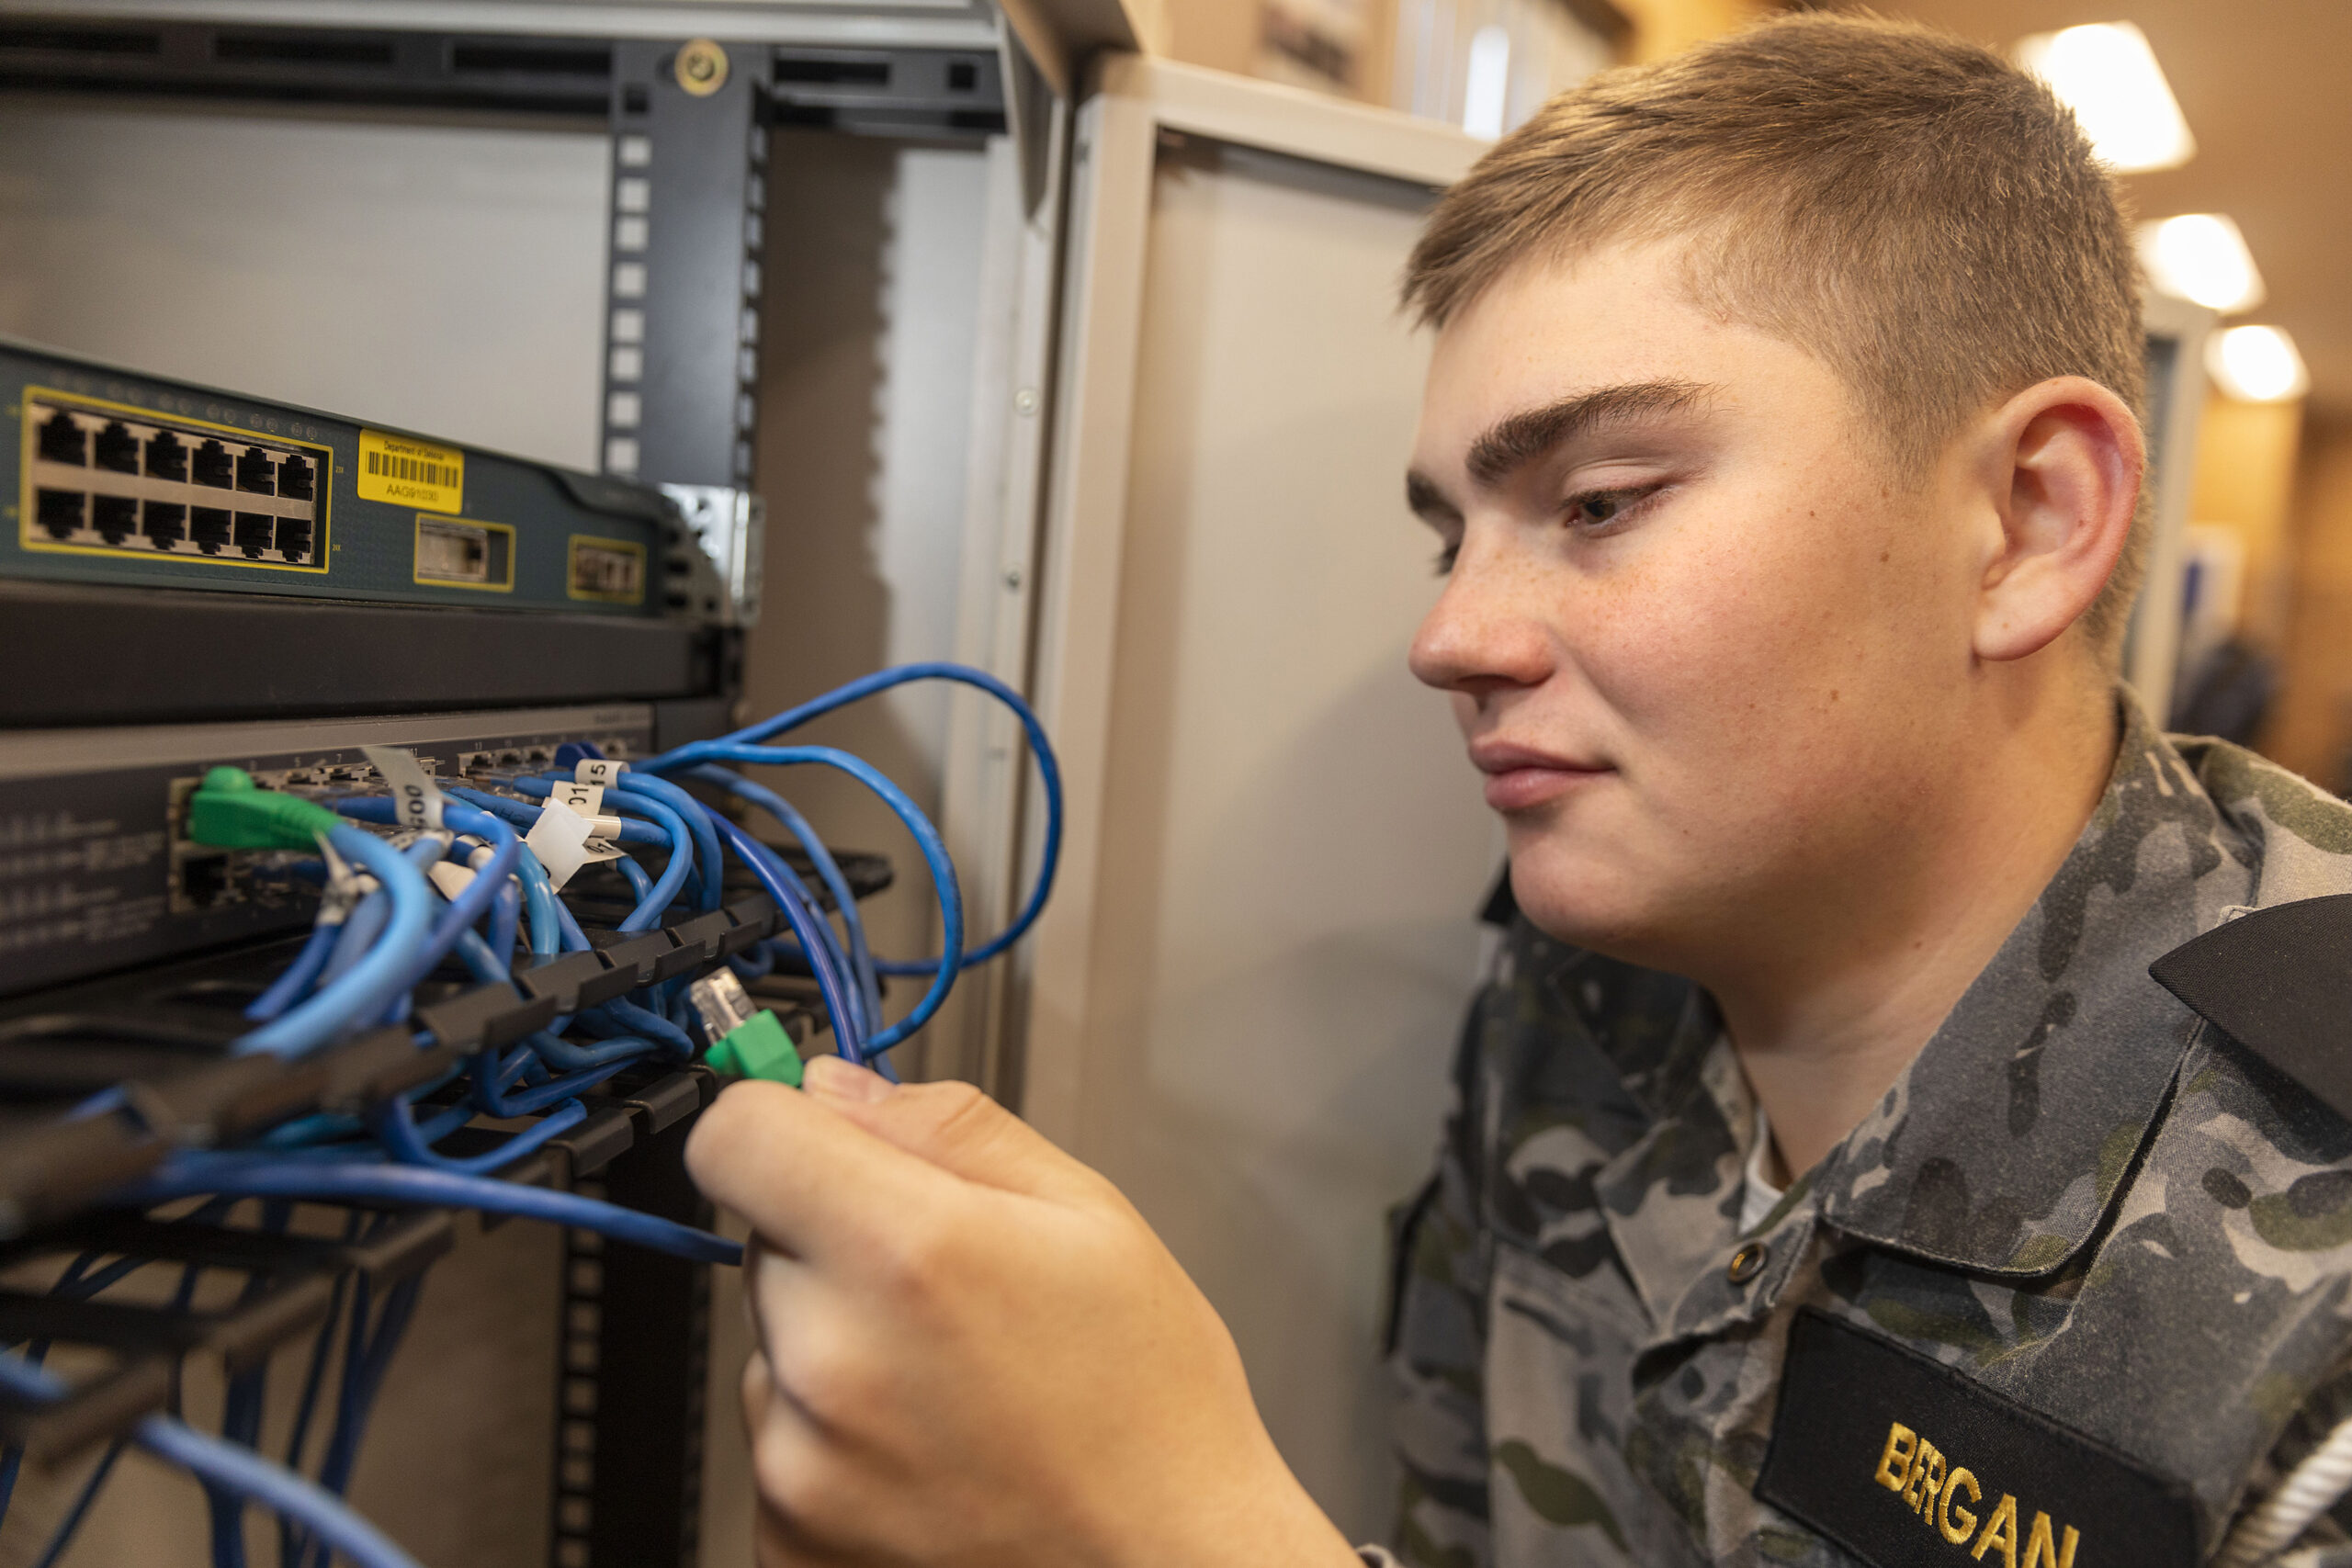 Seaman Communication Information System - Information Specialist Kyle Bergan connects a network cable to a Switch. This training in a controlled environment will allow SMN Bergan to provide live connectivity for his ship at sea, and in a real time scenarios. This is a skill that is highly relied upon by Commanding Officers at sea to ensure their ship maintains connectivity to other ships at sea and key Defence organisations ashore that provide necessary support to Naval operations *** Local Caption *** Meet some of the Navy’s newest communicators currently under training at HMAS Cerberus. Alex, Kyle & Grisadarporn all started their journeys with the Navy through the ANC, they are well on their way to careers in the Information Warfare community.Alex, a communications specialist in training, joined from TS Walrus. His professional development encompasses Satellite systems, radio systems, voice procedures, tactical manoeuvring of ships, in addition to other means of communications that are critical to Navy’s ability to remain engaged. Kyle (TS Toowoomba) and Grisadarporn (TS Henty) are training to be Information Systems specialists. Their areas of responsibility will include the management and support of Navy’s ICT at sea. They are progressing their development under the CompTIA certification framework. Collectively, these sailors will contribute to the establishment, maintenance and protection of Navy’s Information Environments against a wide range of threats including Cyber attack.